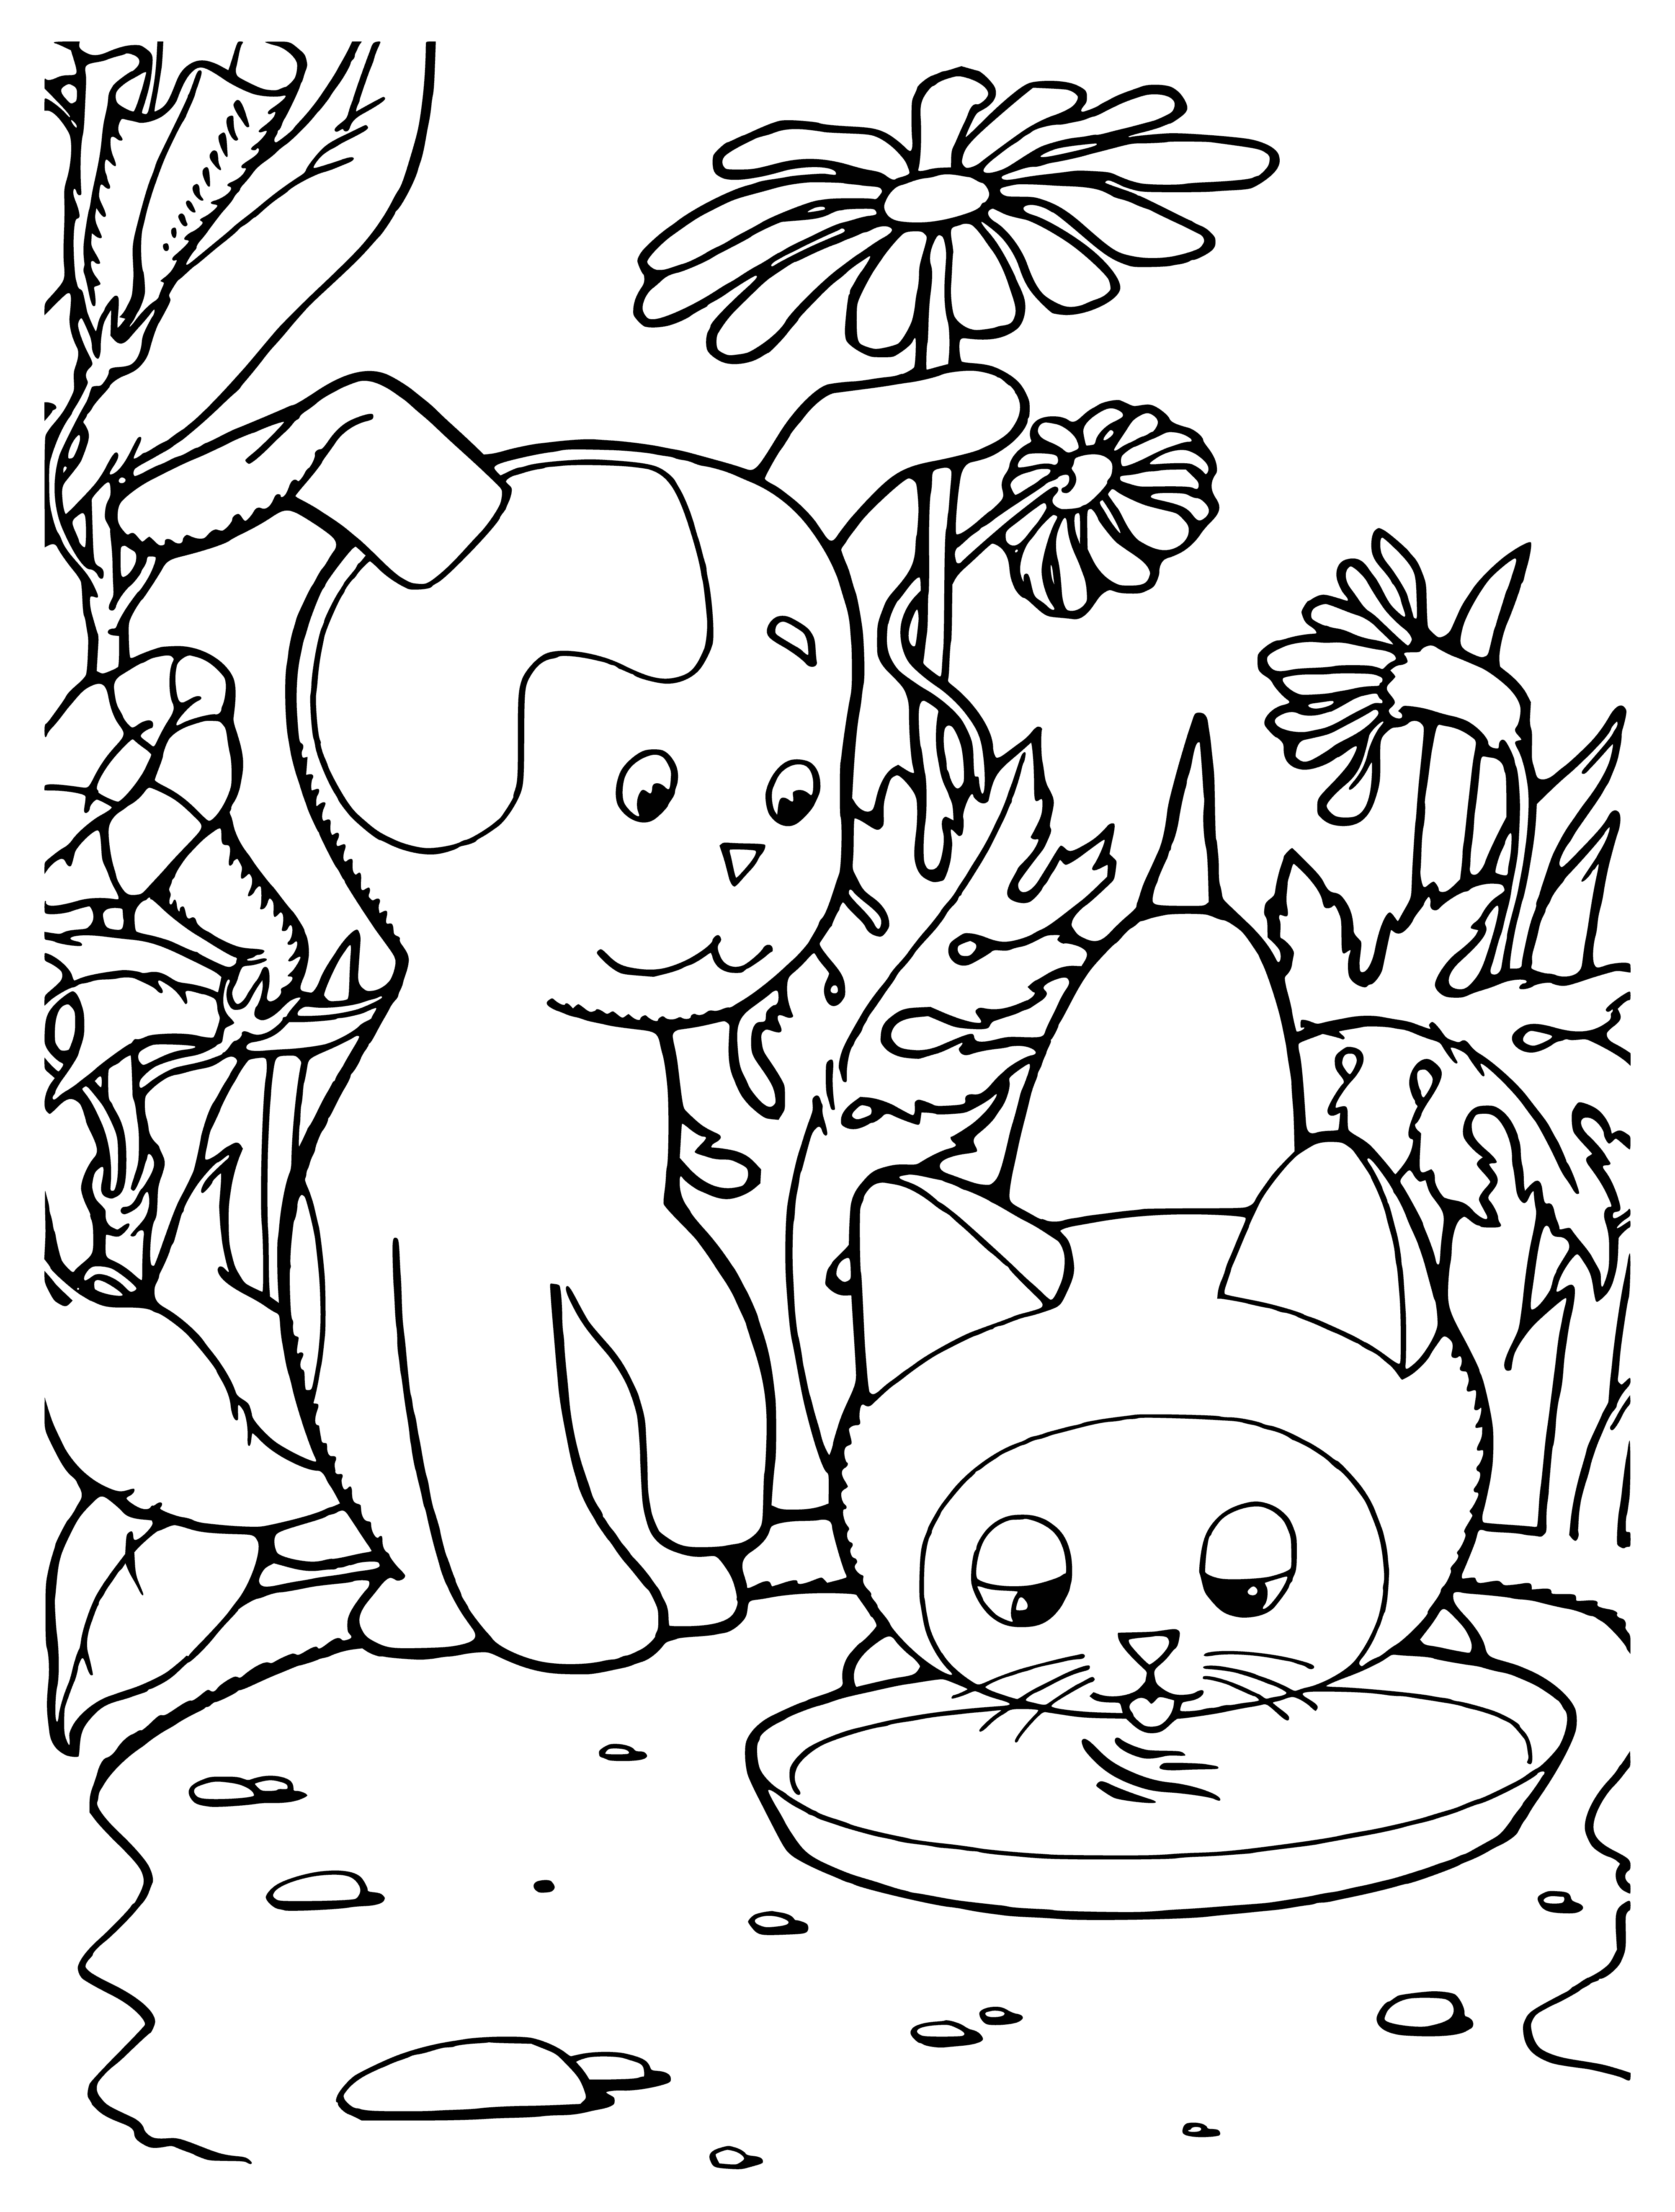 coloring page: Two kittens, one looking with blue eyes, one laughing with brown fur. Paws on the ground, meow & laugh.